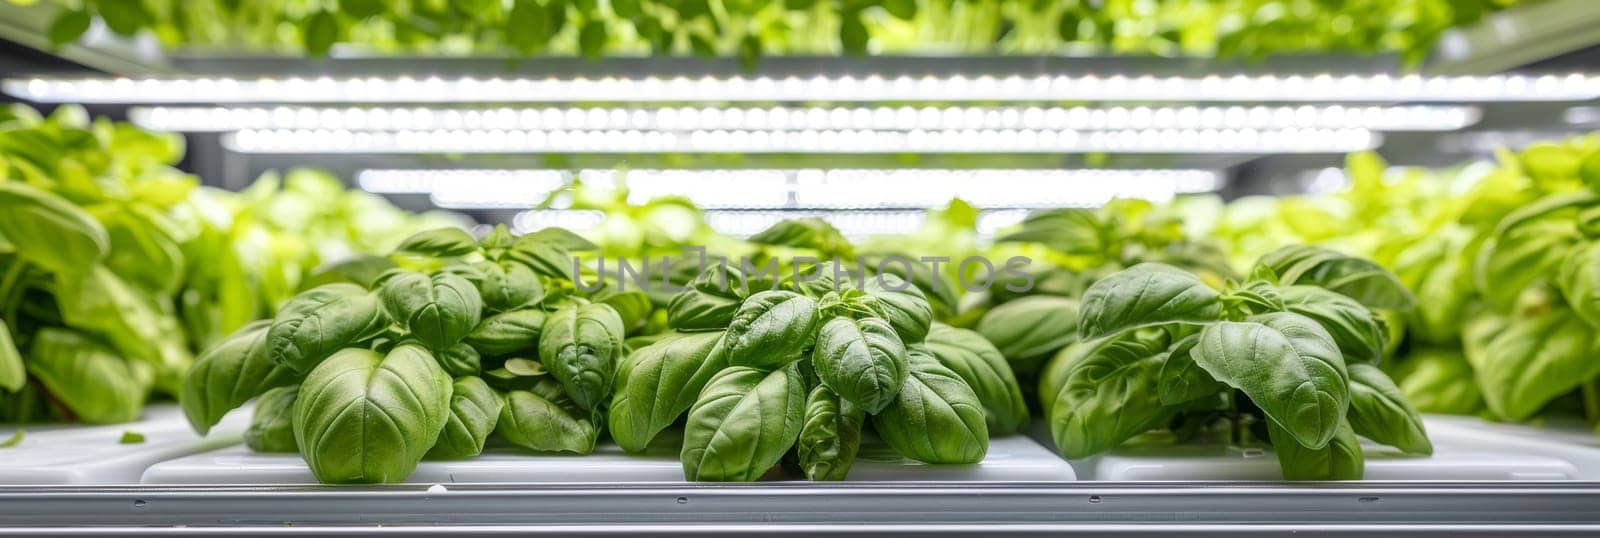 A bountiful indoor hydroponic farm filled with rows of vibrant, fresh basil plants thriving under LED grow lights